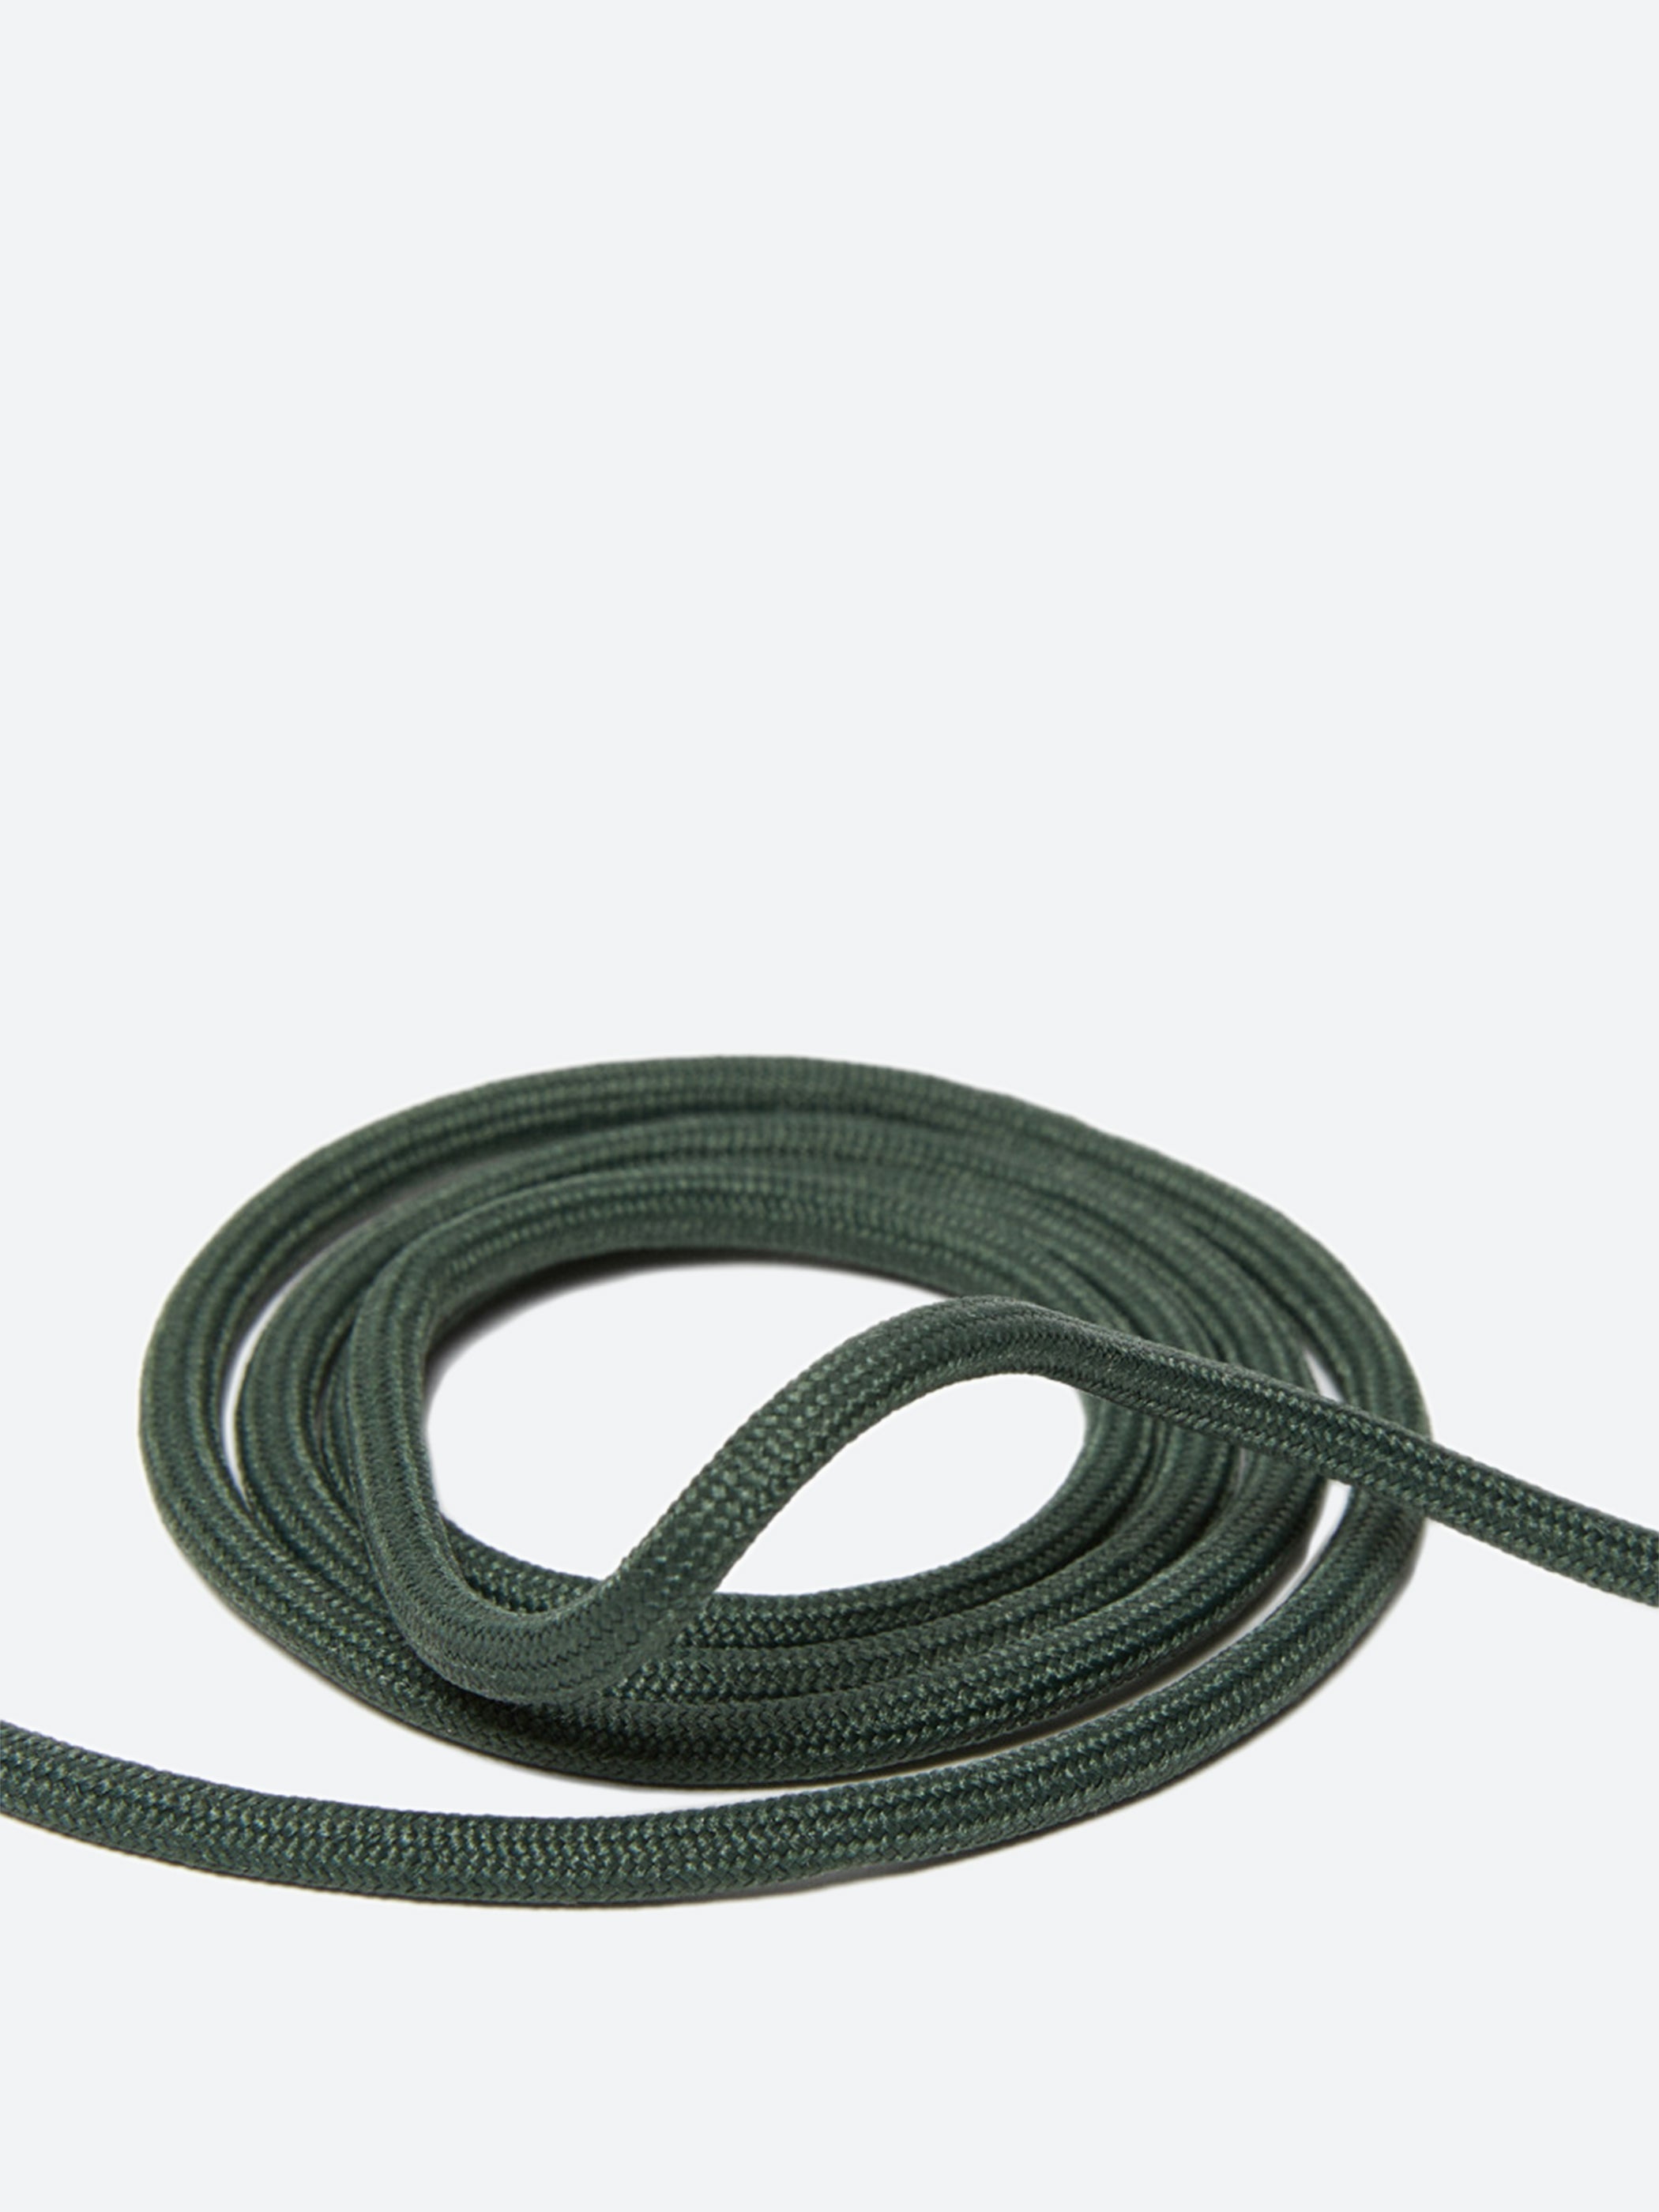 55 Inch Round Shoe Laces